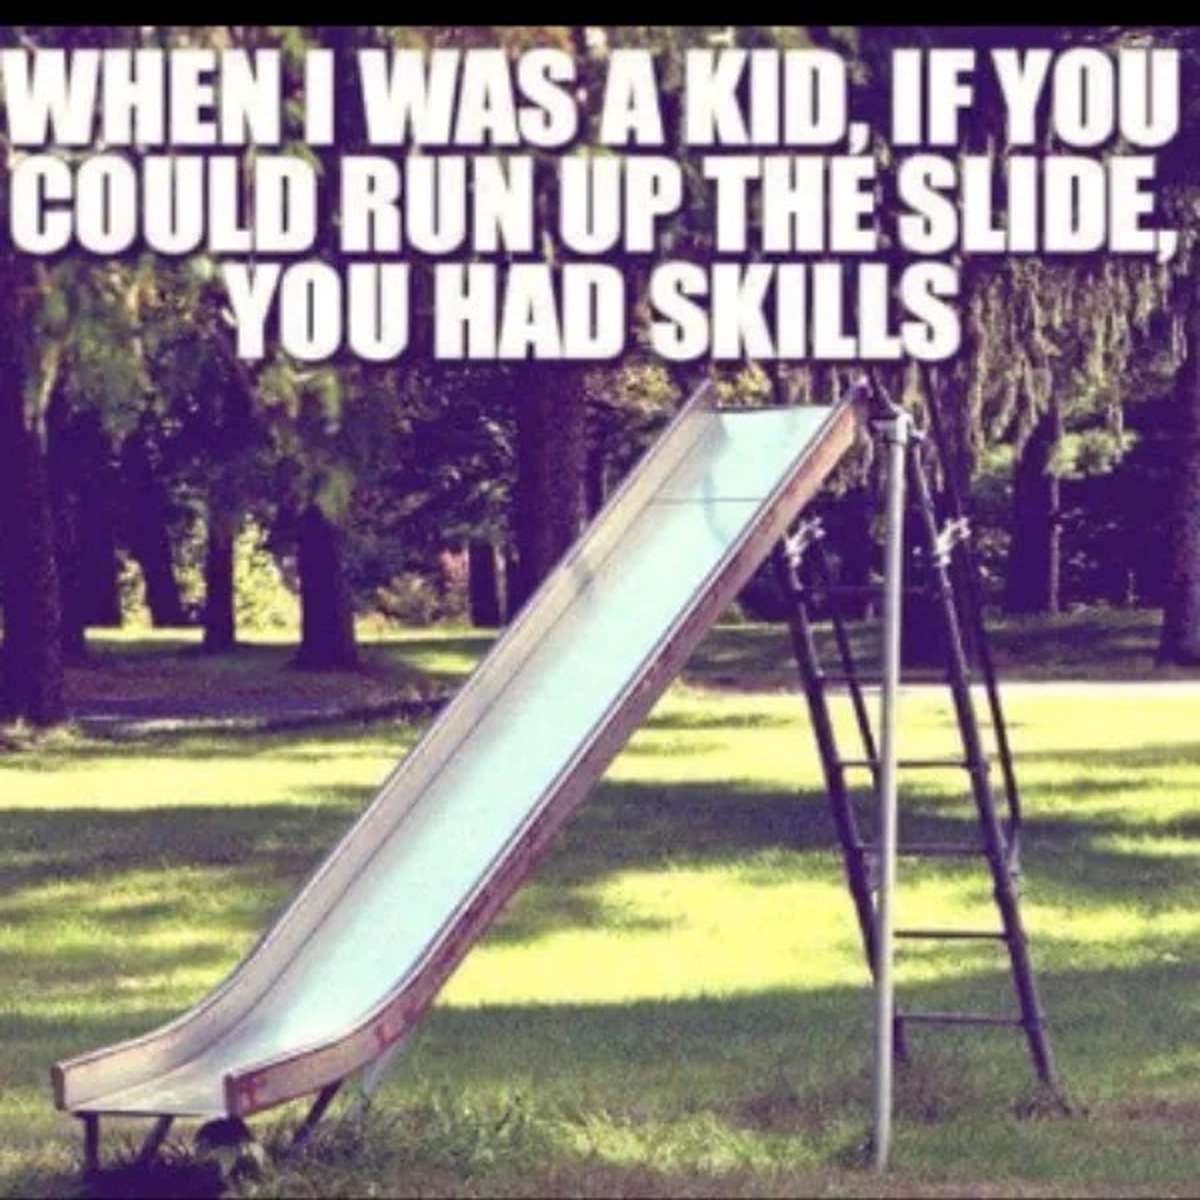 dank memes - outdoor play equipment - When I Was A Kid, If You Could Run Up The Slide. You Had Skills